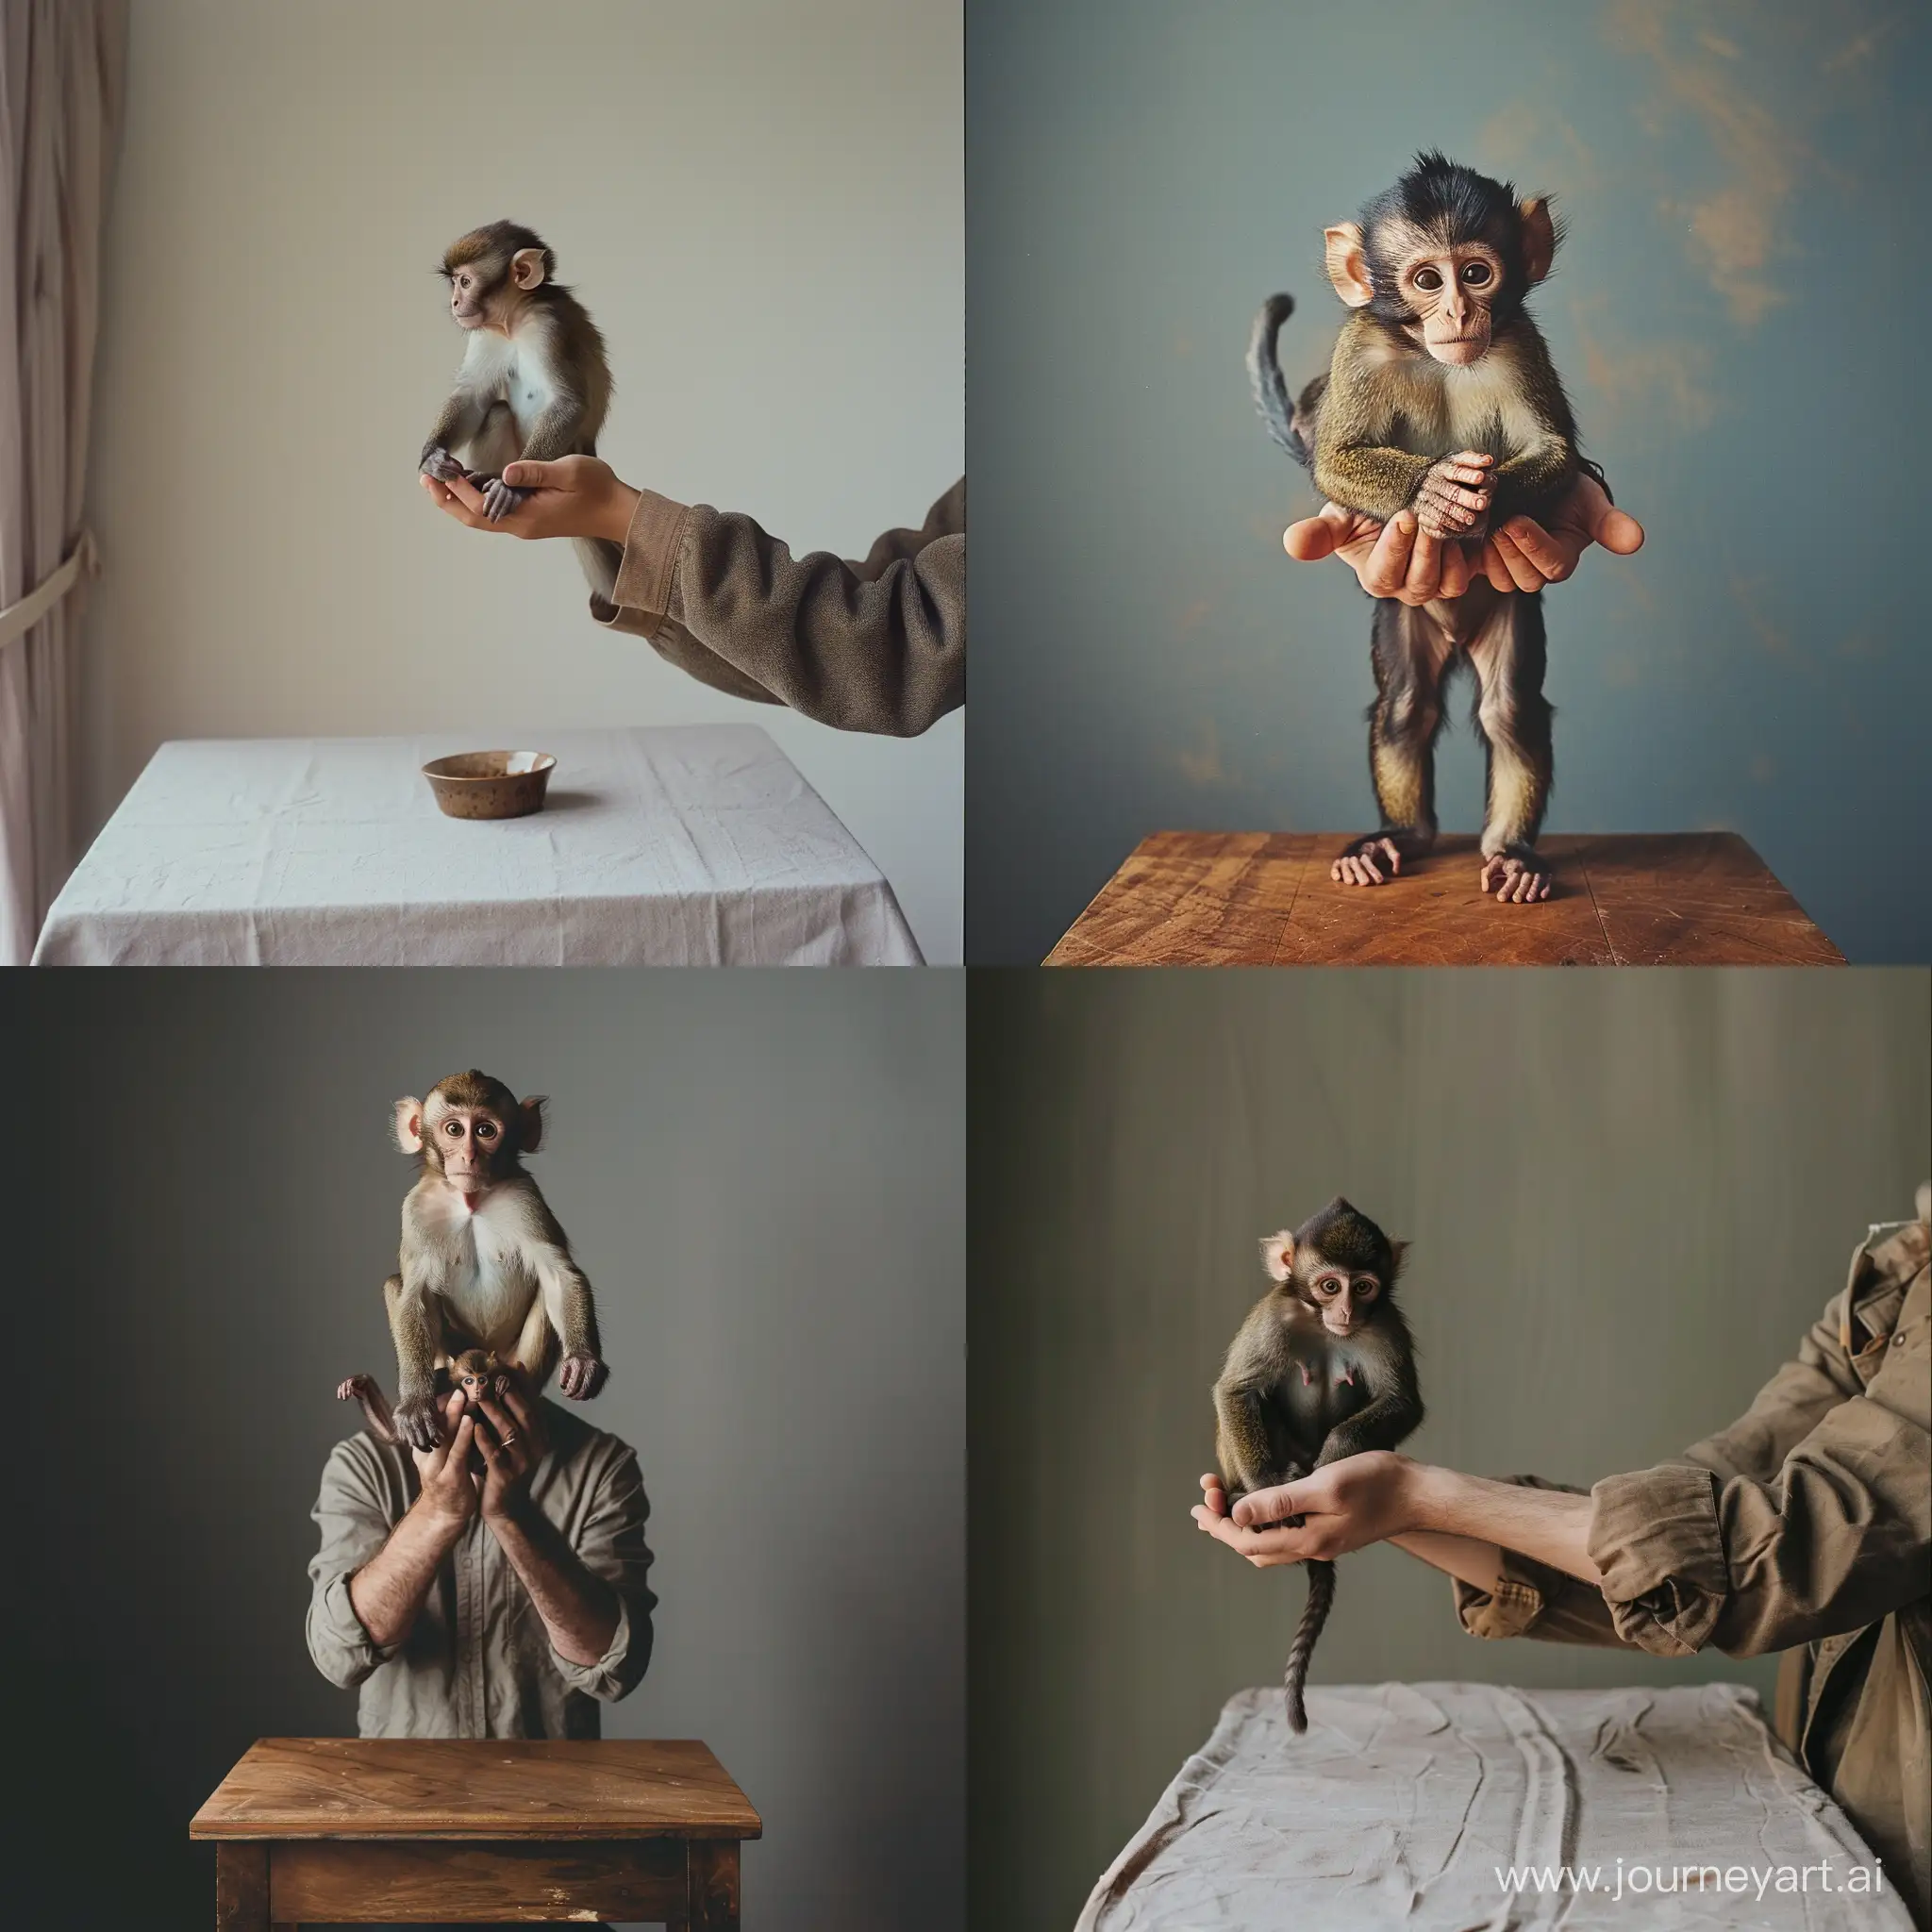 Playful-Interaction-Person-Holding-Monkey-on-Table